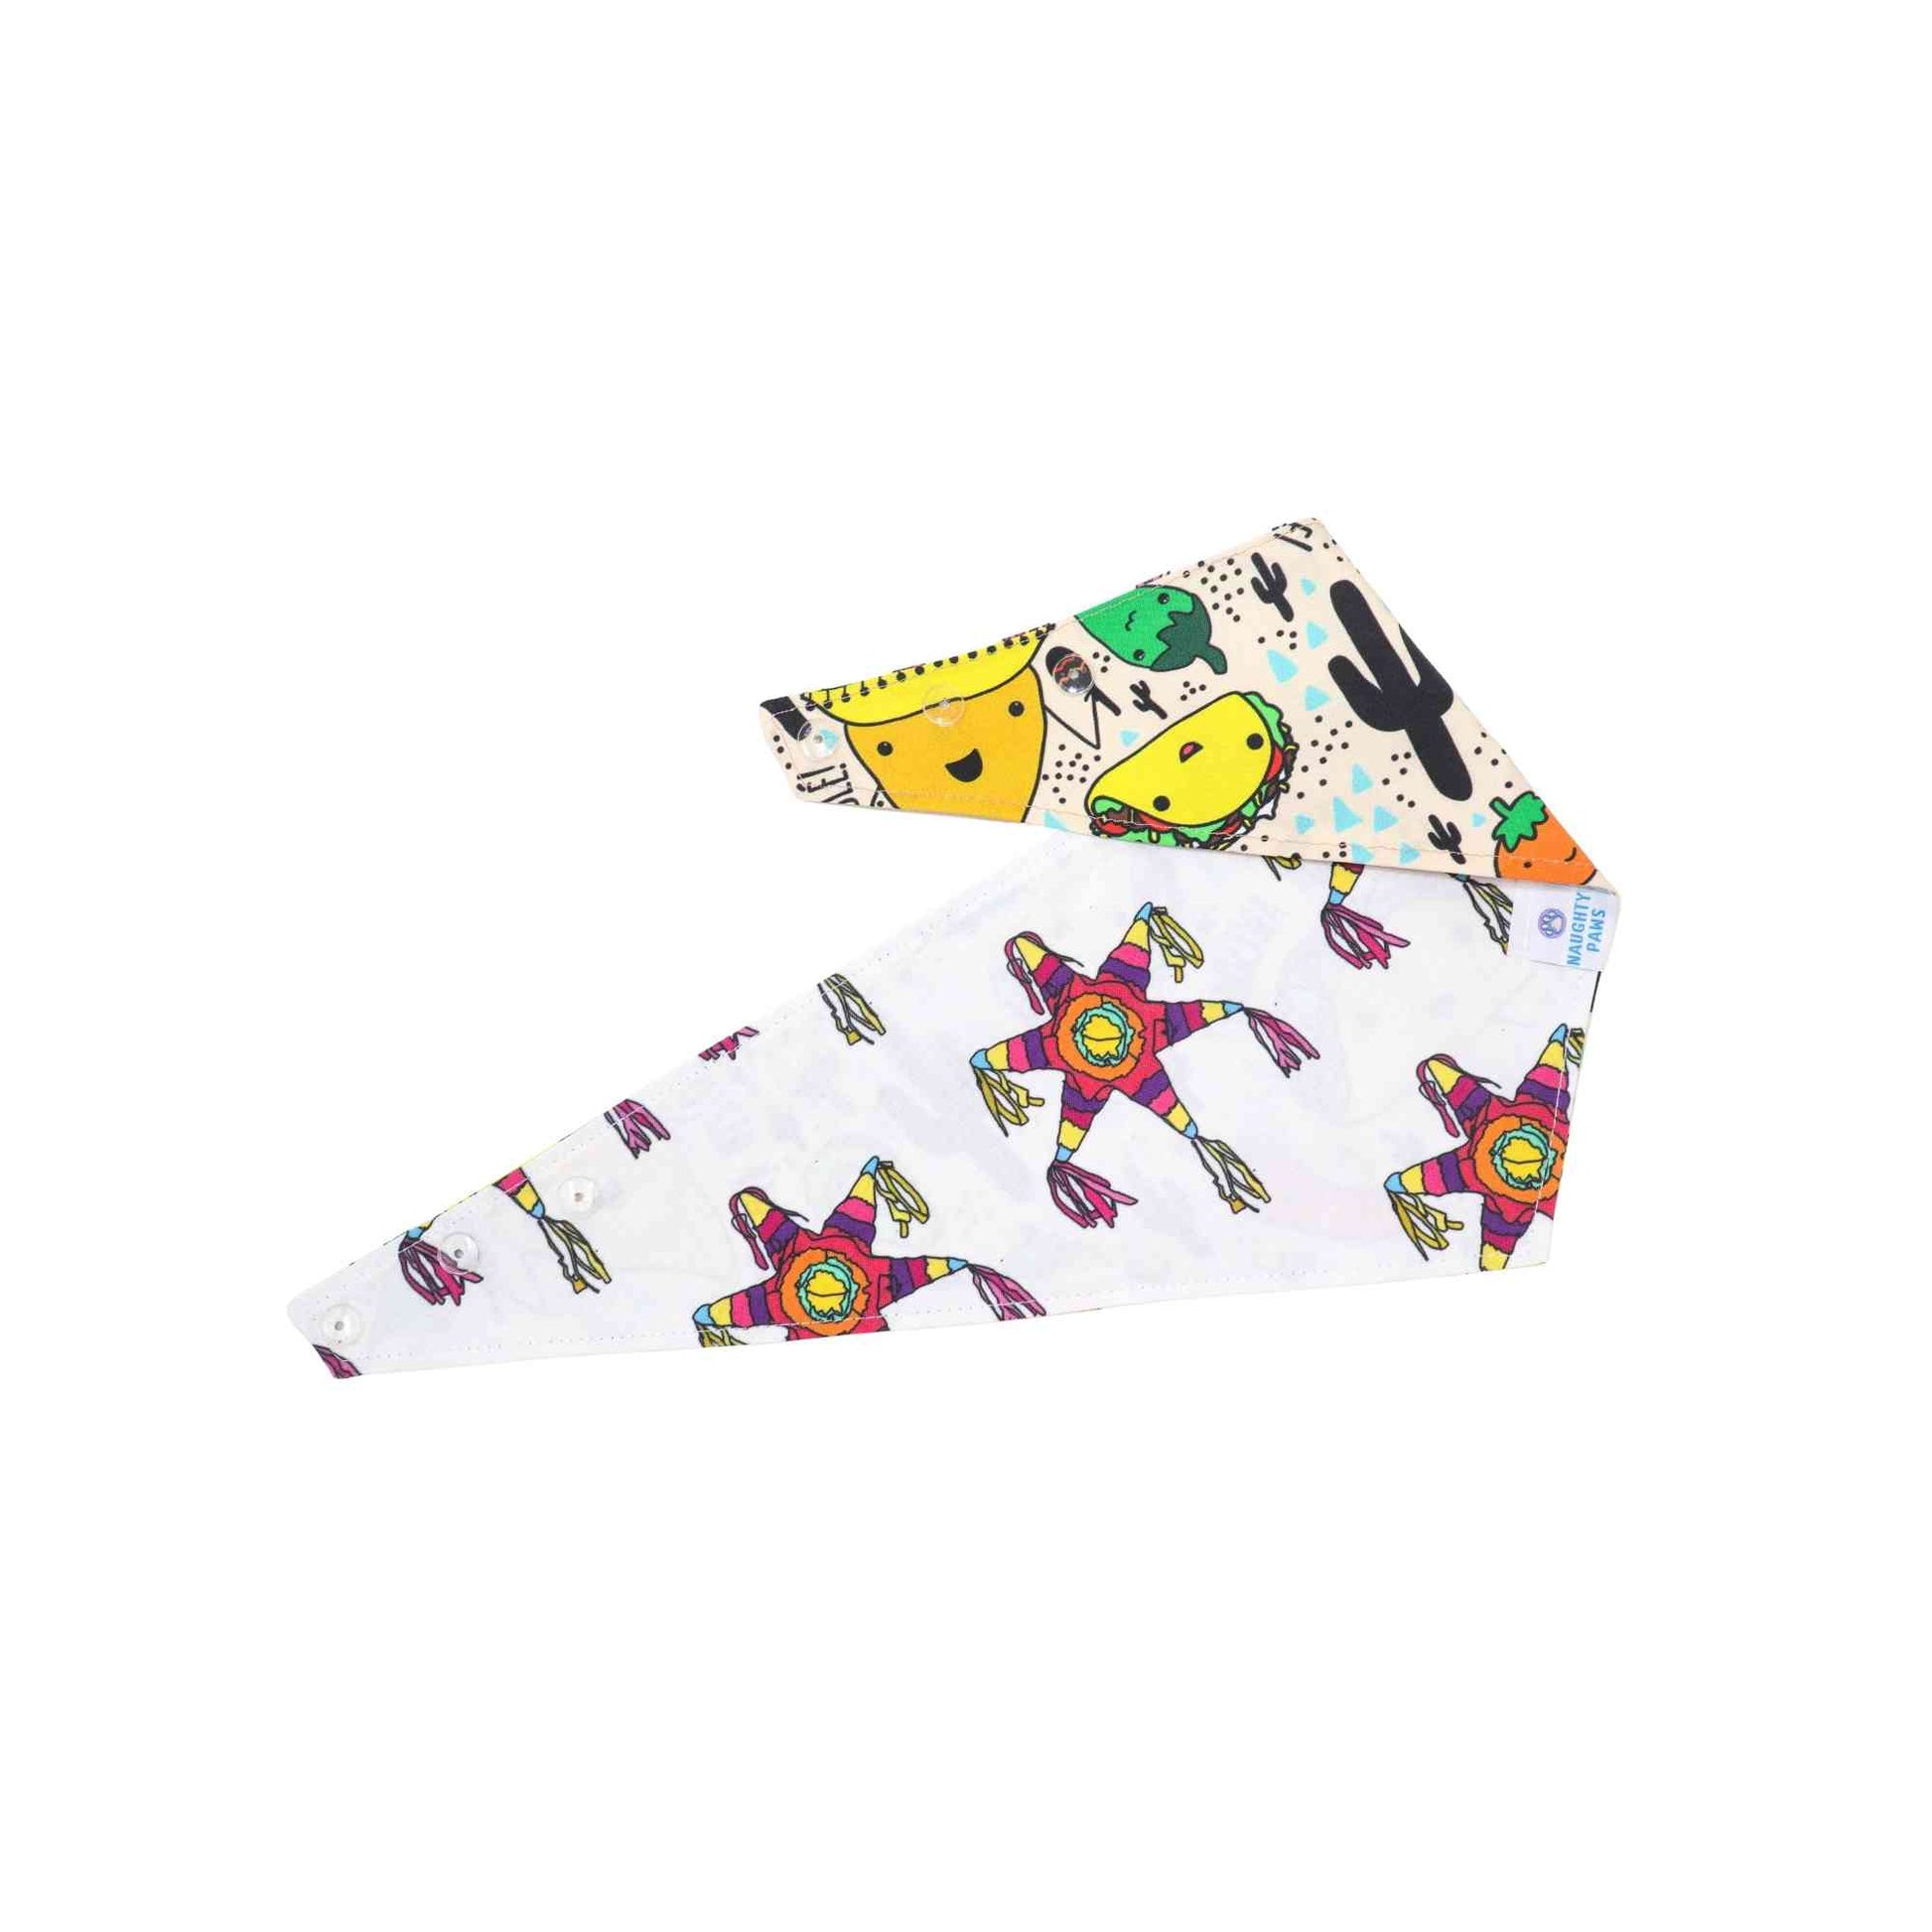 Get your furry friend ready for the 5 de Mayo celebration with our 'Let's Taco-bout' Tacos and Piñatas reversible dog bandana. Our bandana features a fun and festive design with tacos and piñatas, perfect for any fiesta. The reversible design allows for two different looks in one, providing versatility and style. 